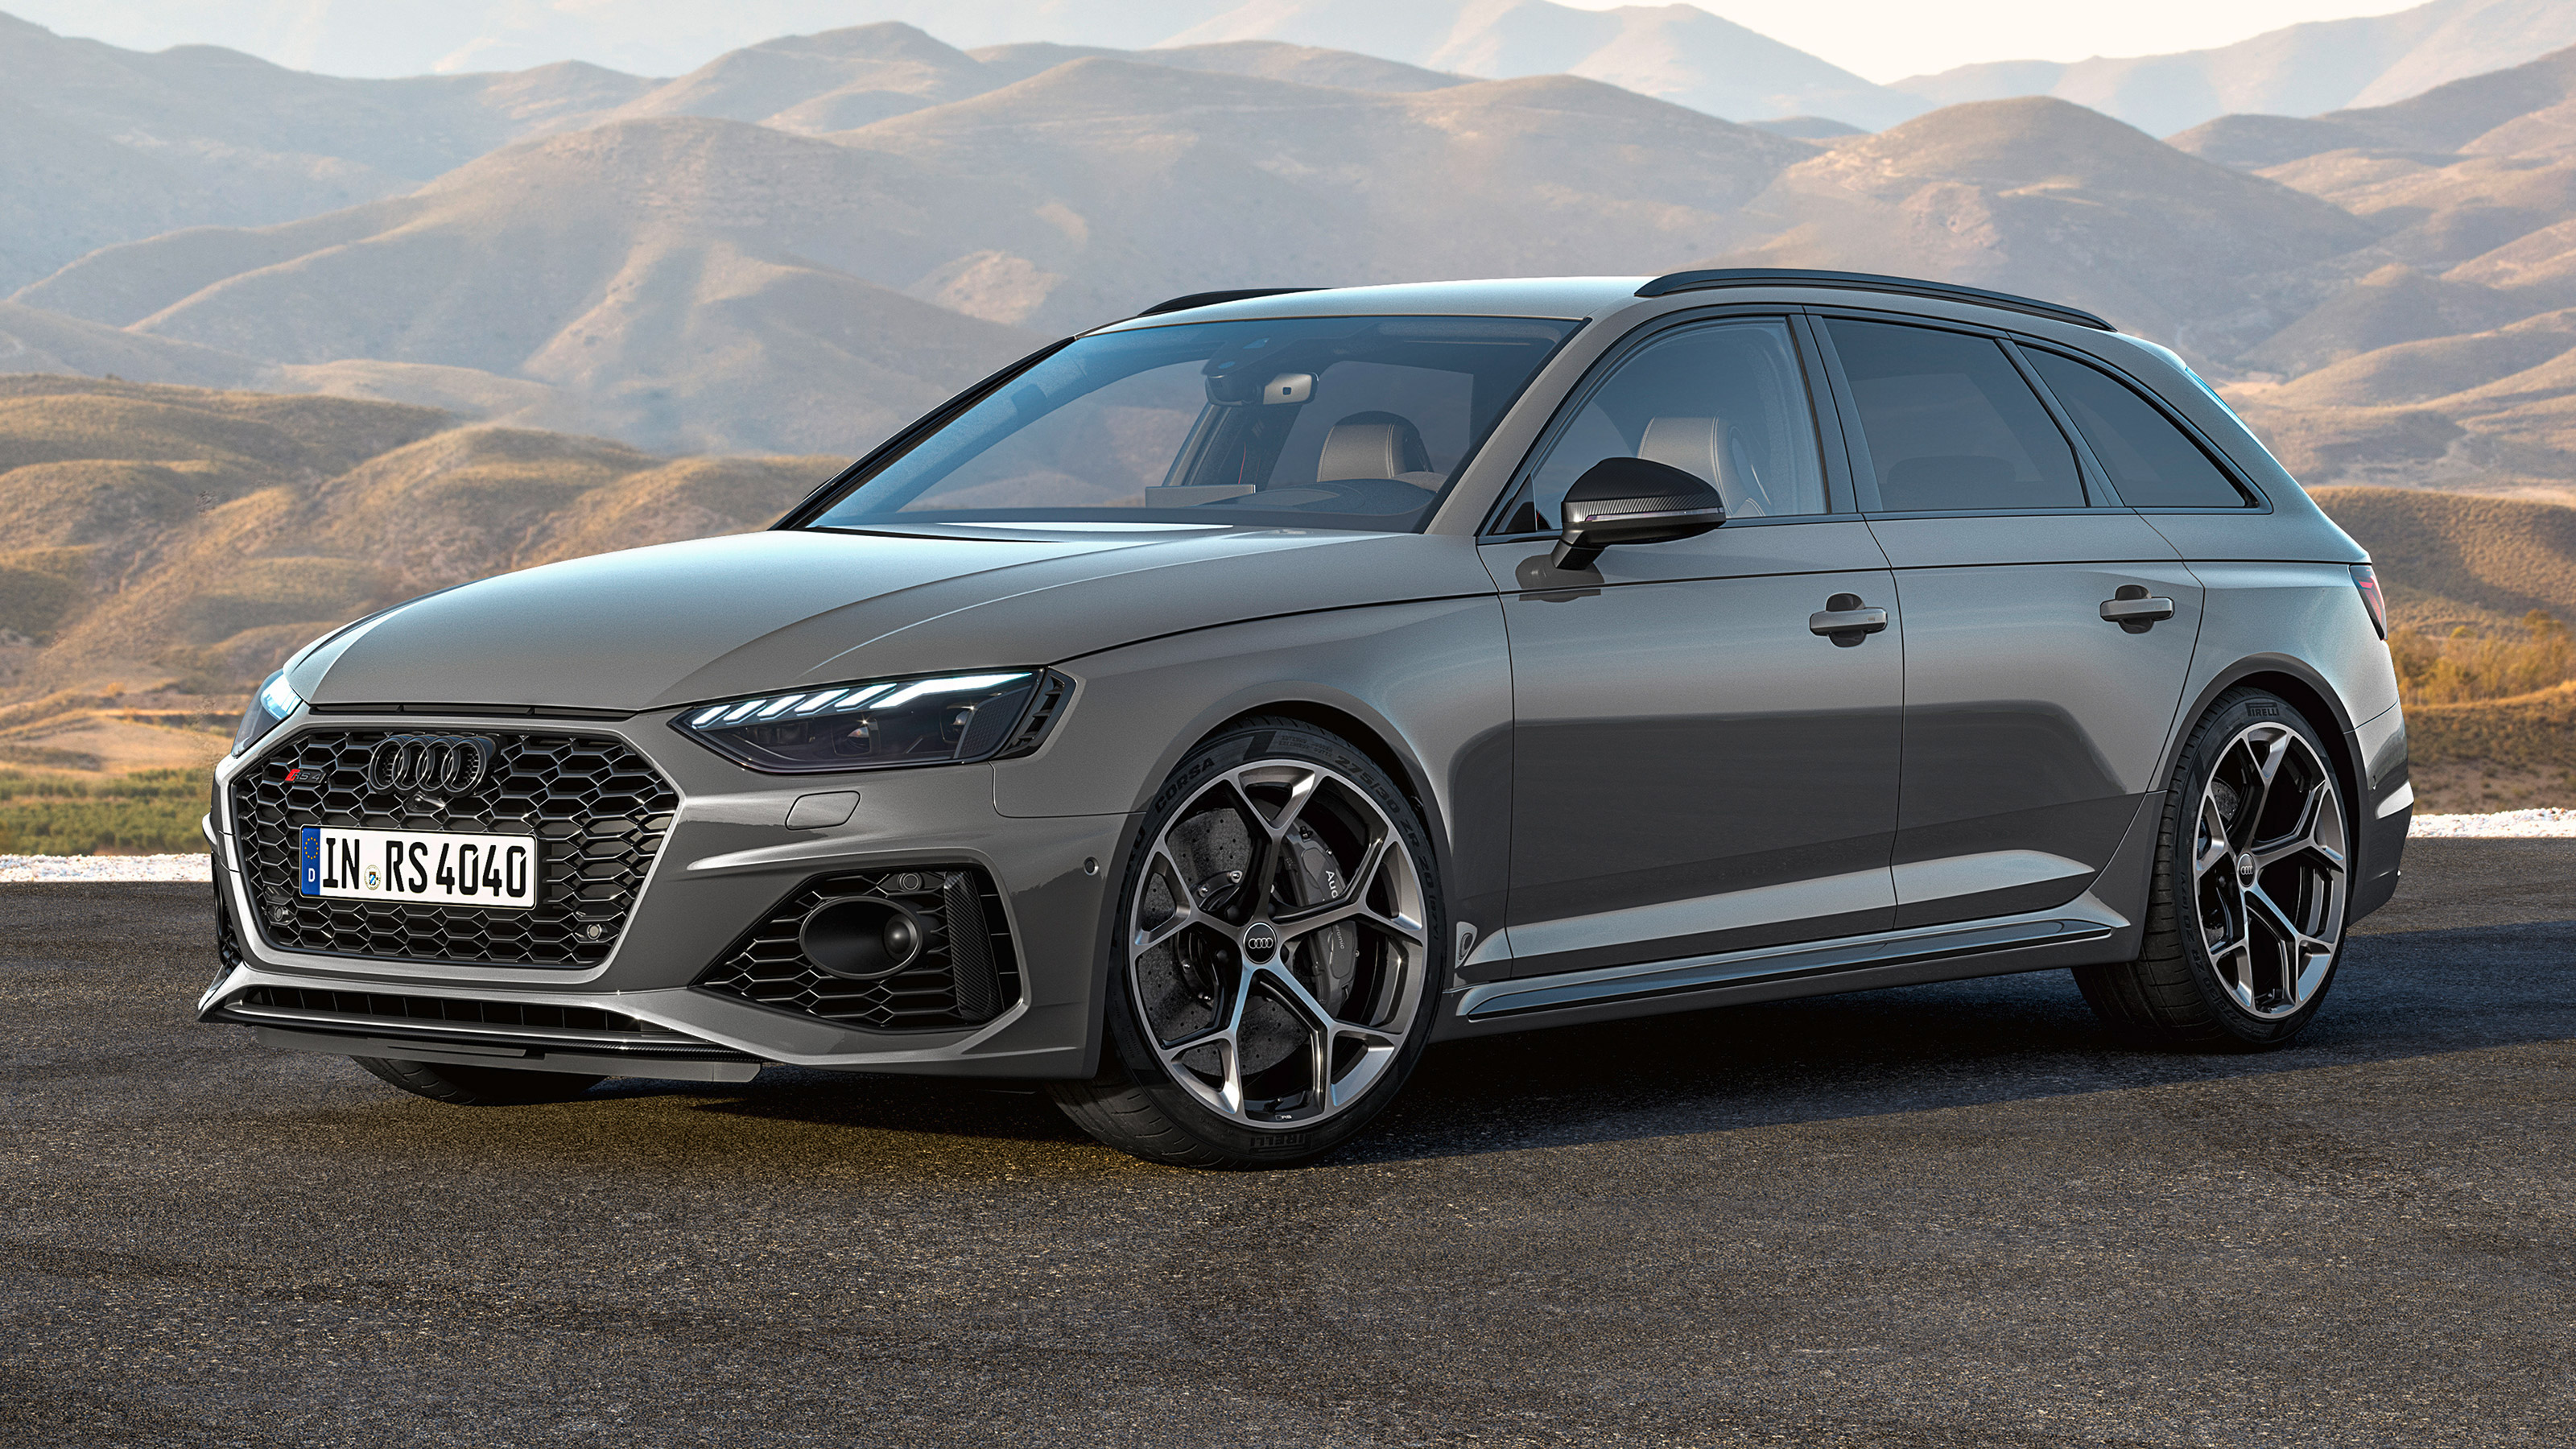 Limited-run Audi RS4 Competition priced from £84,600 | evo